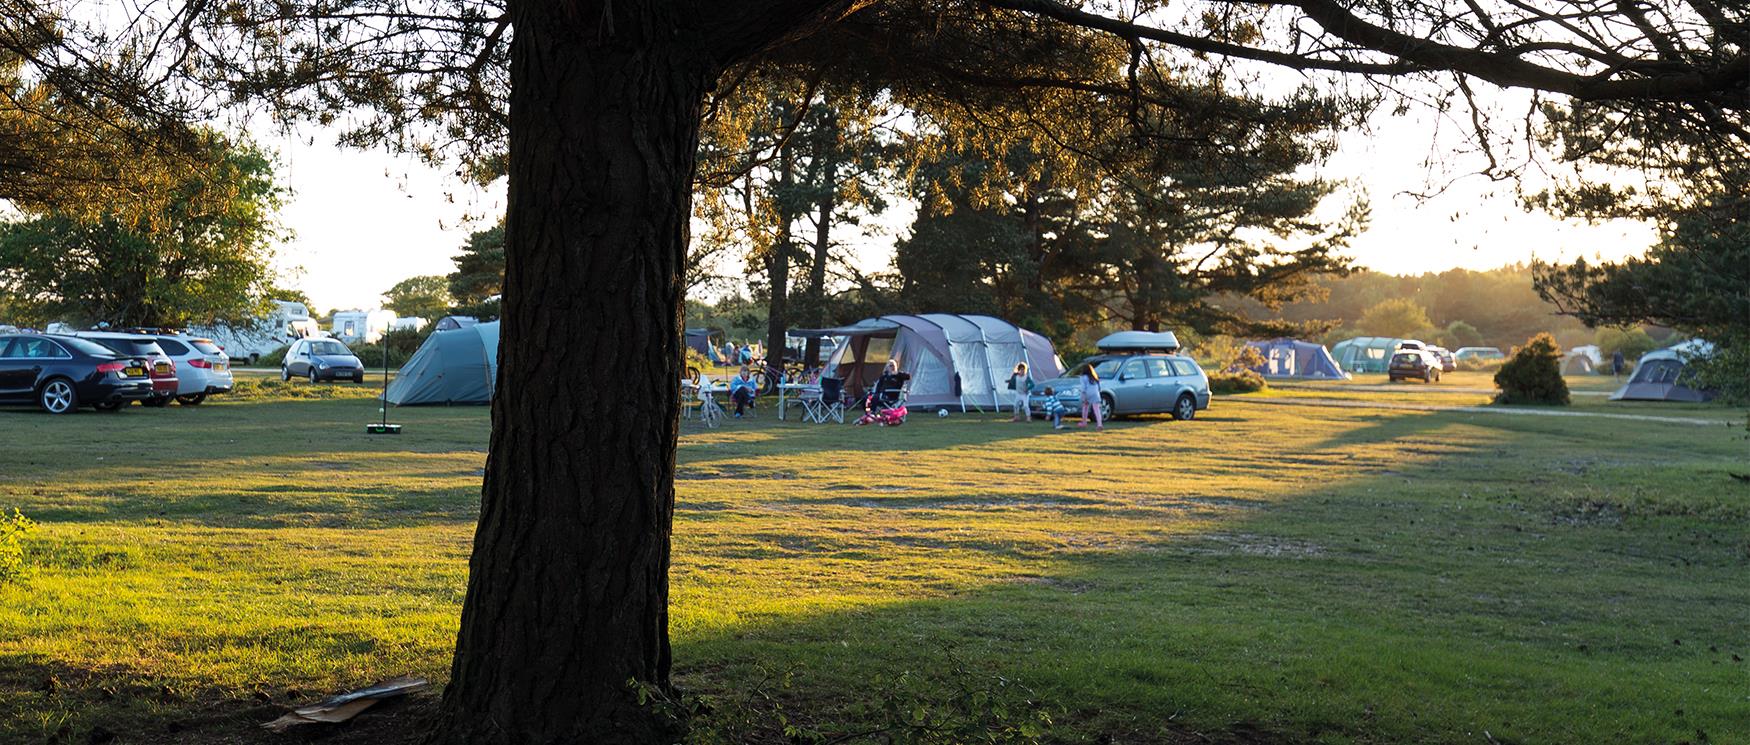 Campsite in the New Forest National Park